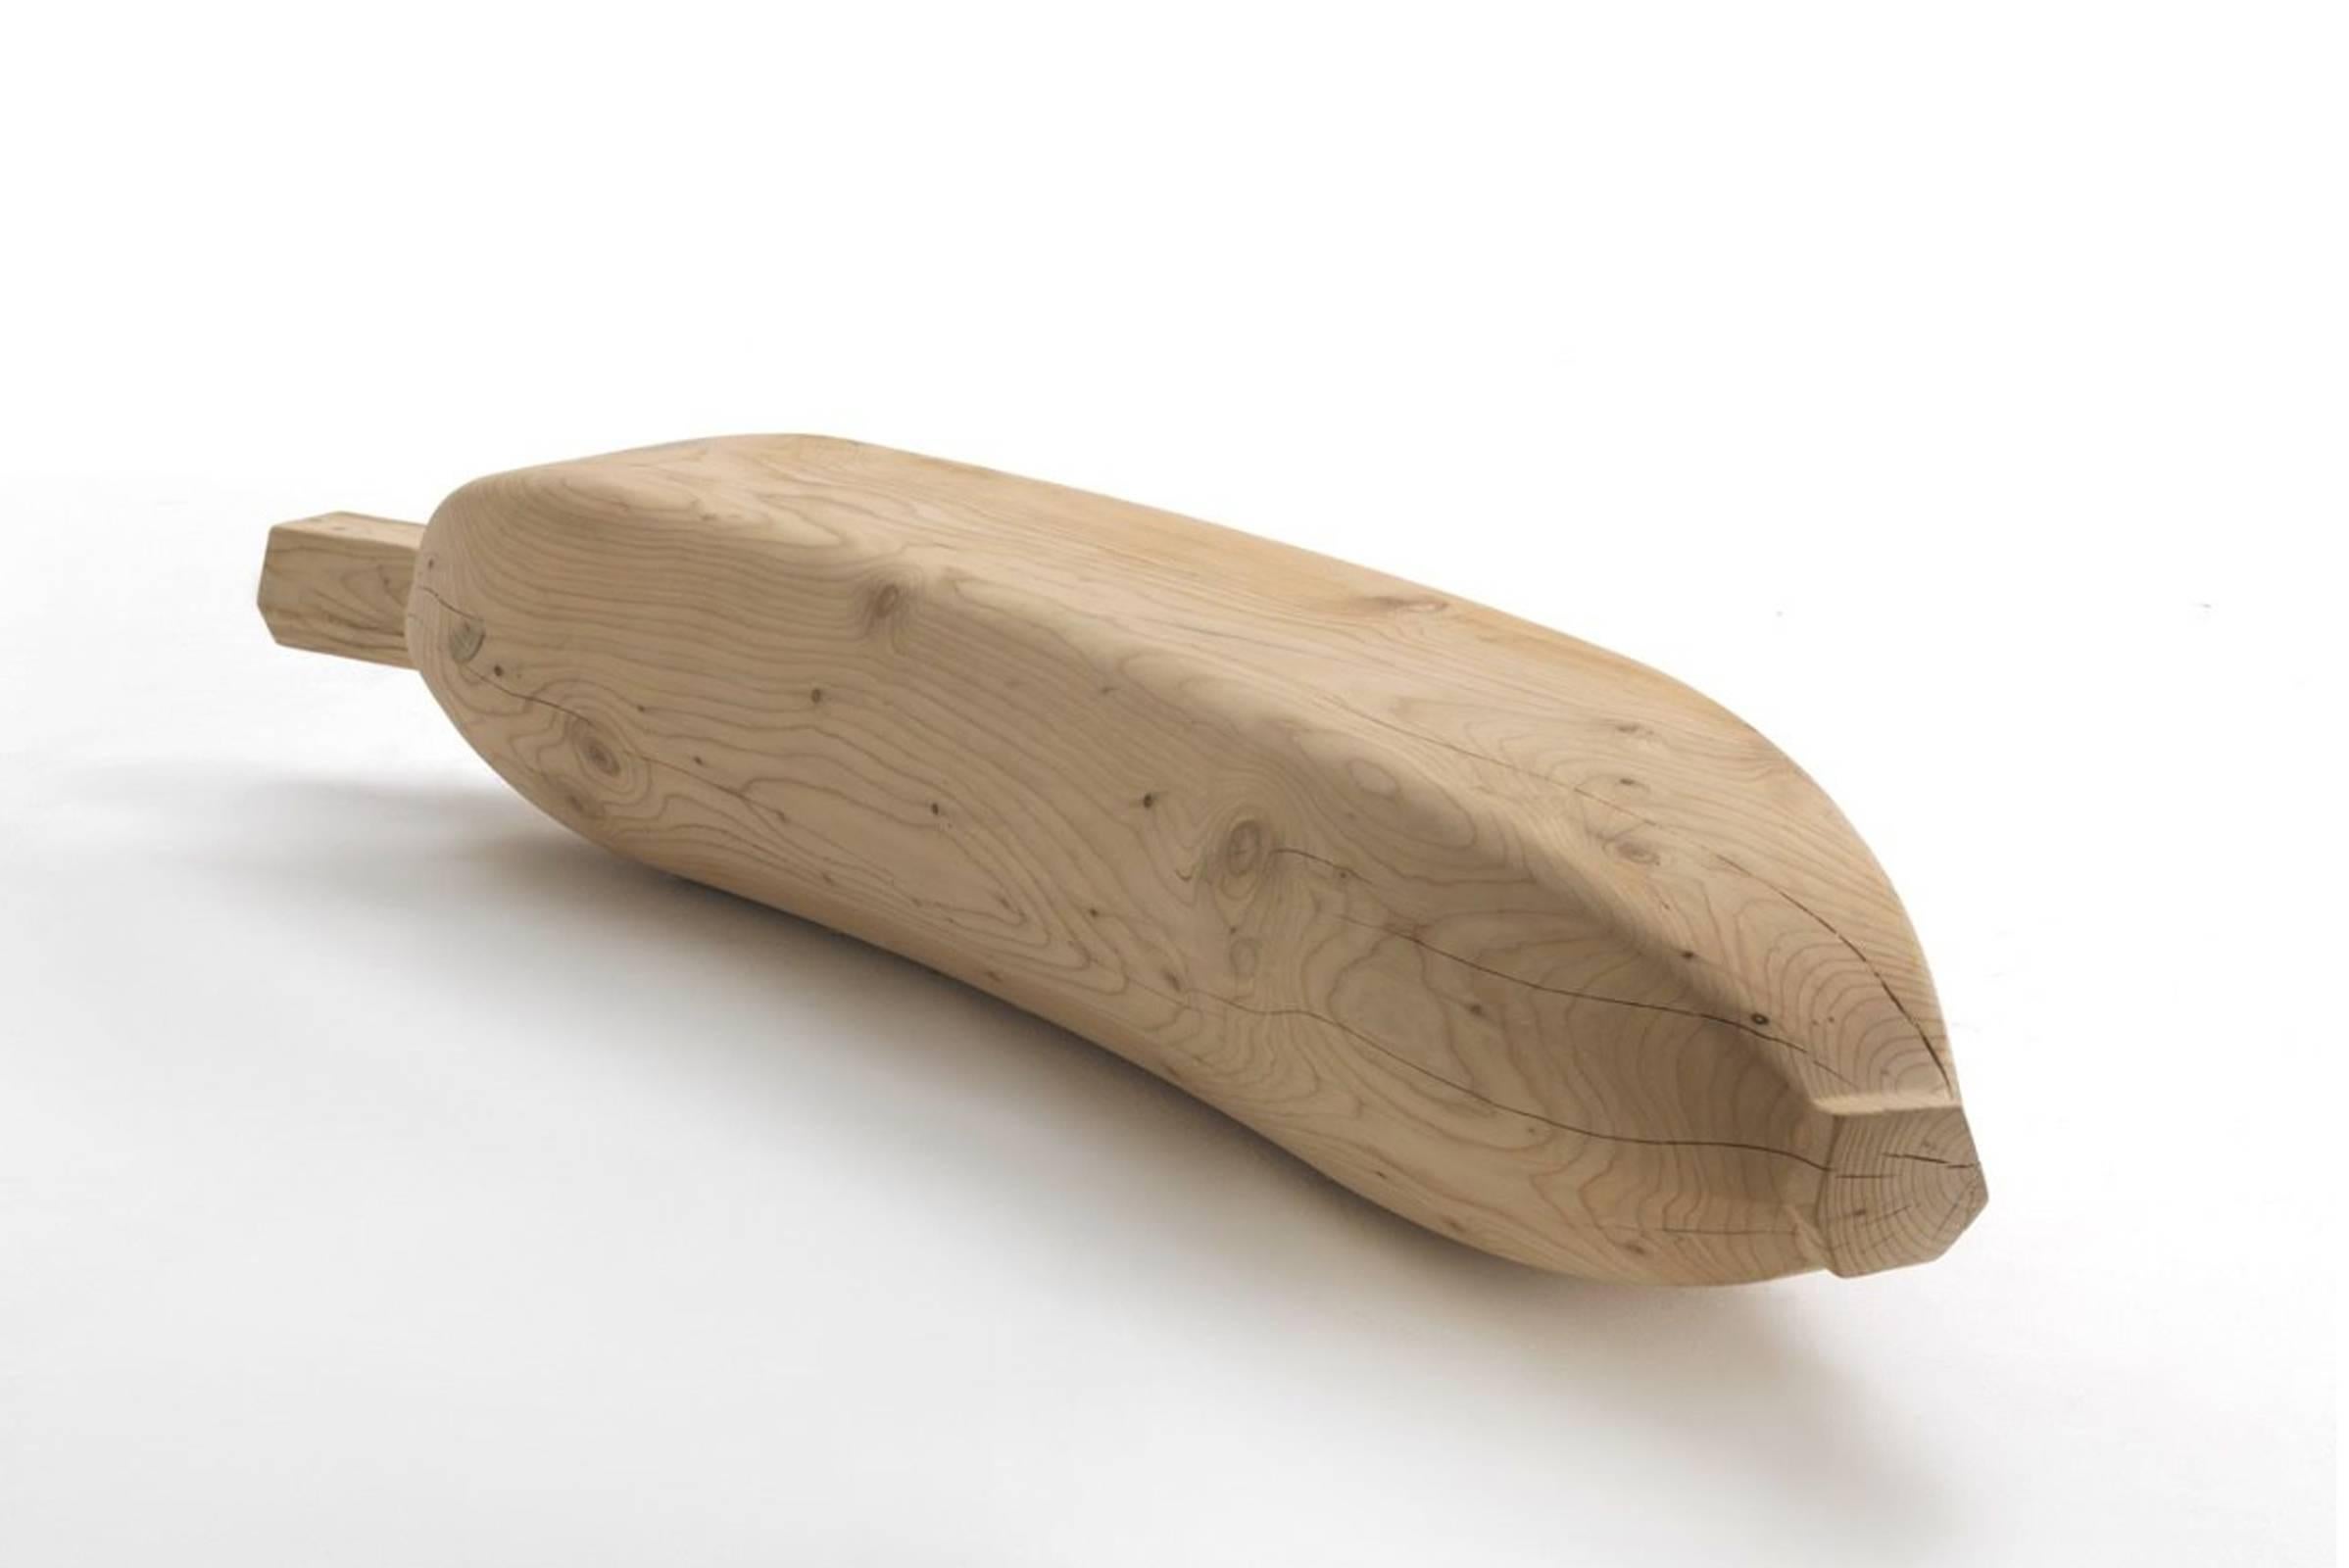 Bench banana carved in one block of
aromatic cedar wood. Original piece,
natural living with rare noble wood.
Available in burnt wood, price: 8900,00€.
Solid cedar wood include movement, 
cracks and changes in wood conditions, 
this is the essential